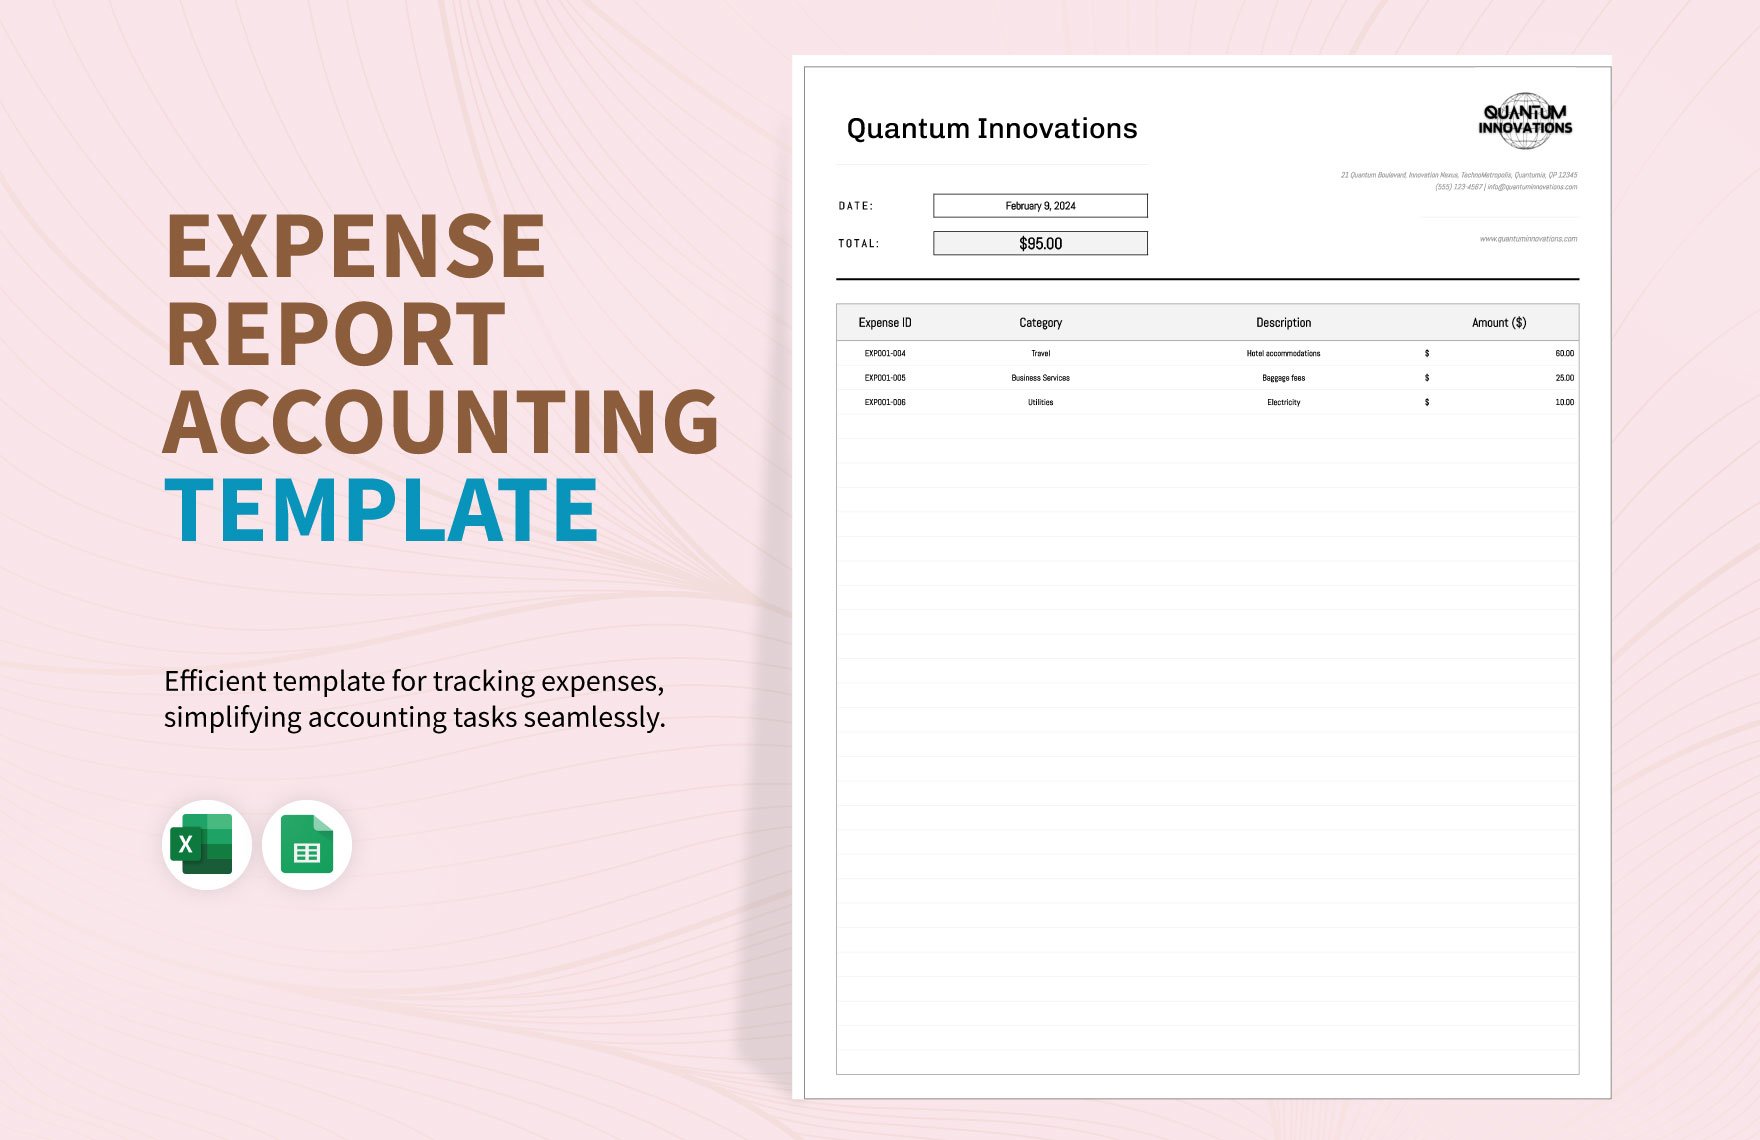 Expense Report Accounting Template